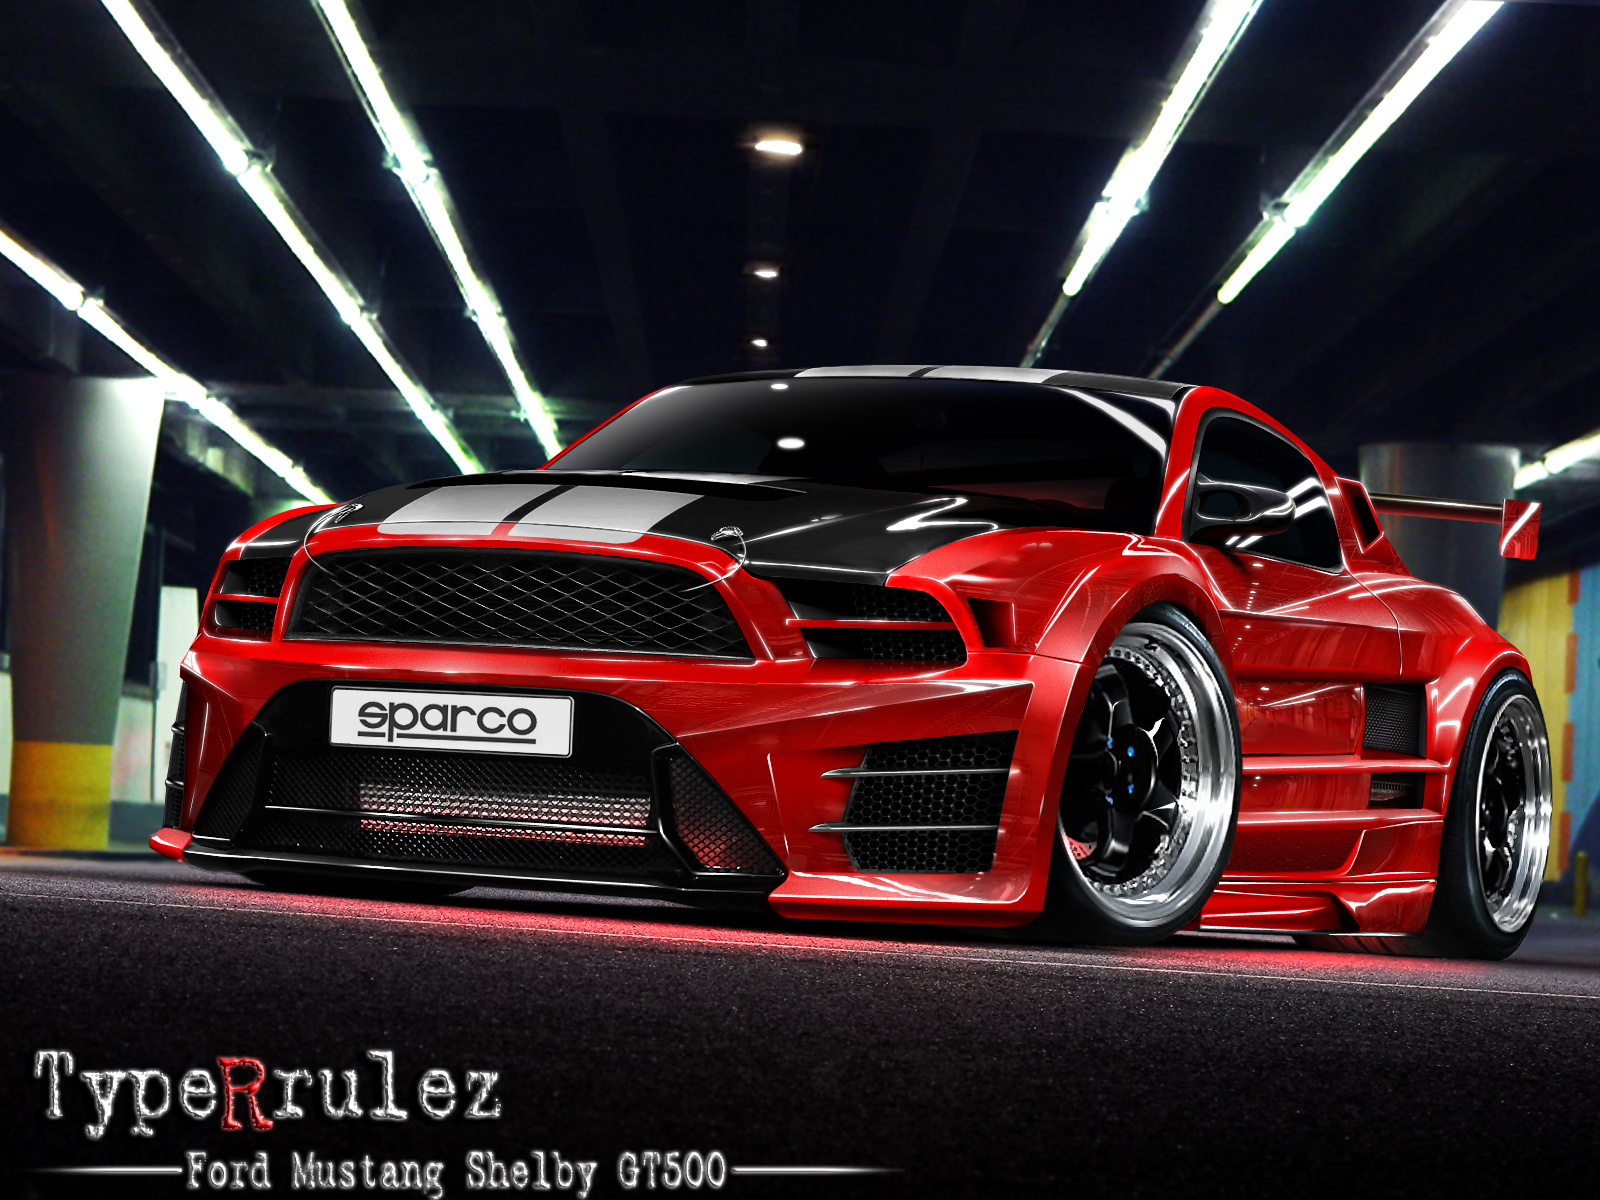 ford, Mustang, Shelby, Gt500 Wallpaper